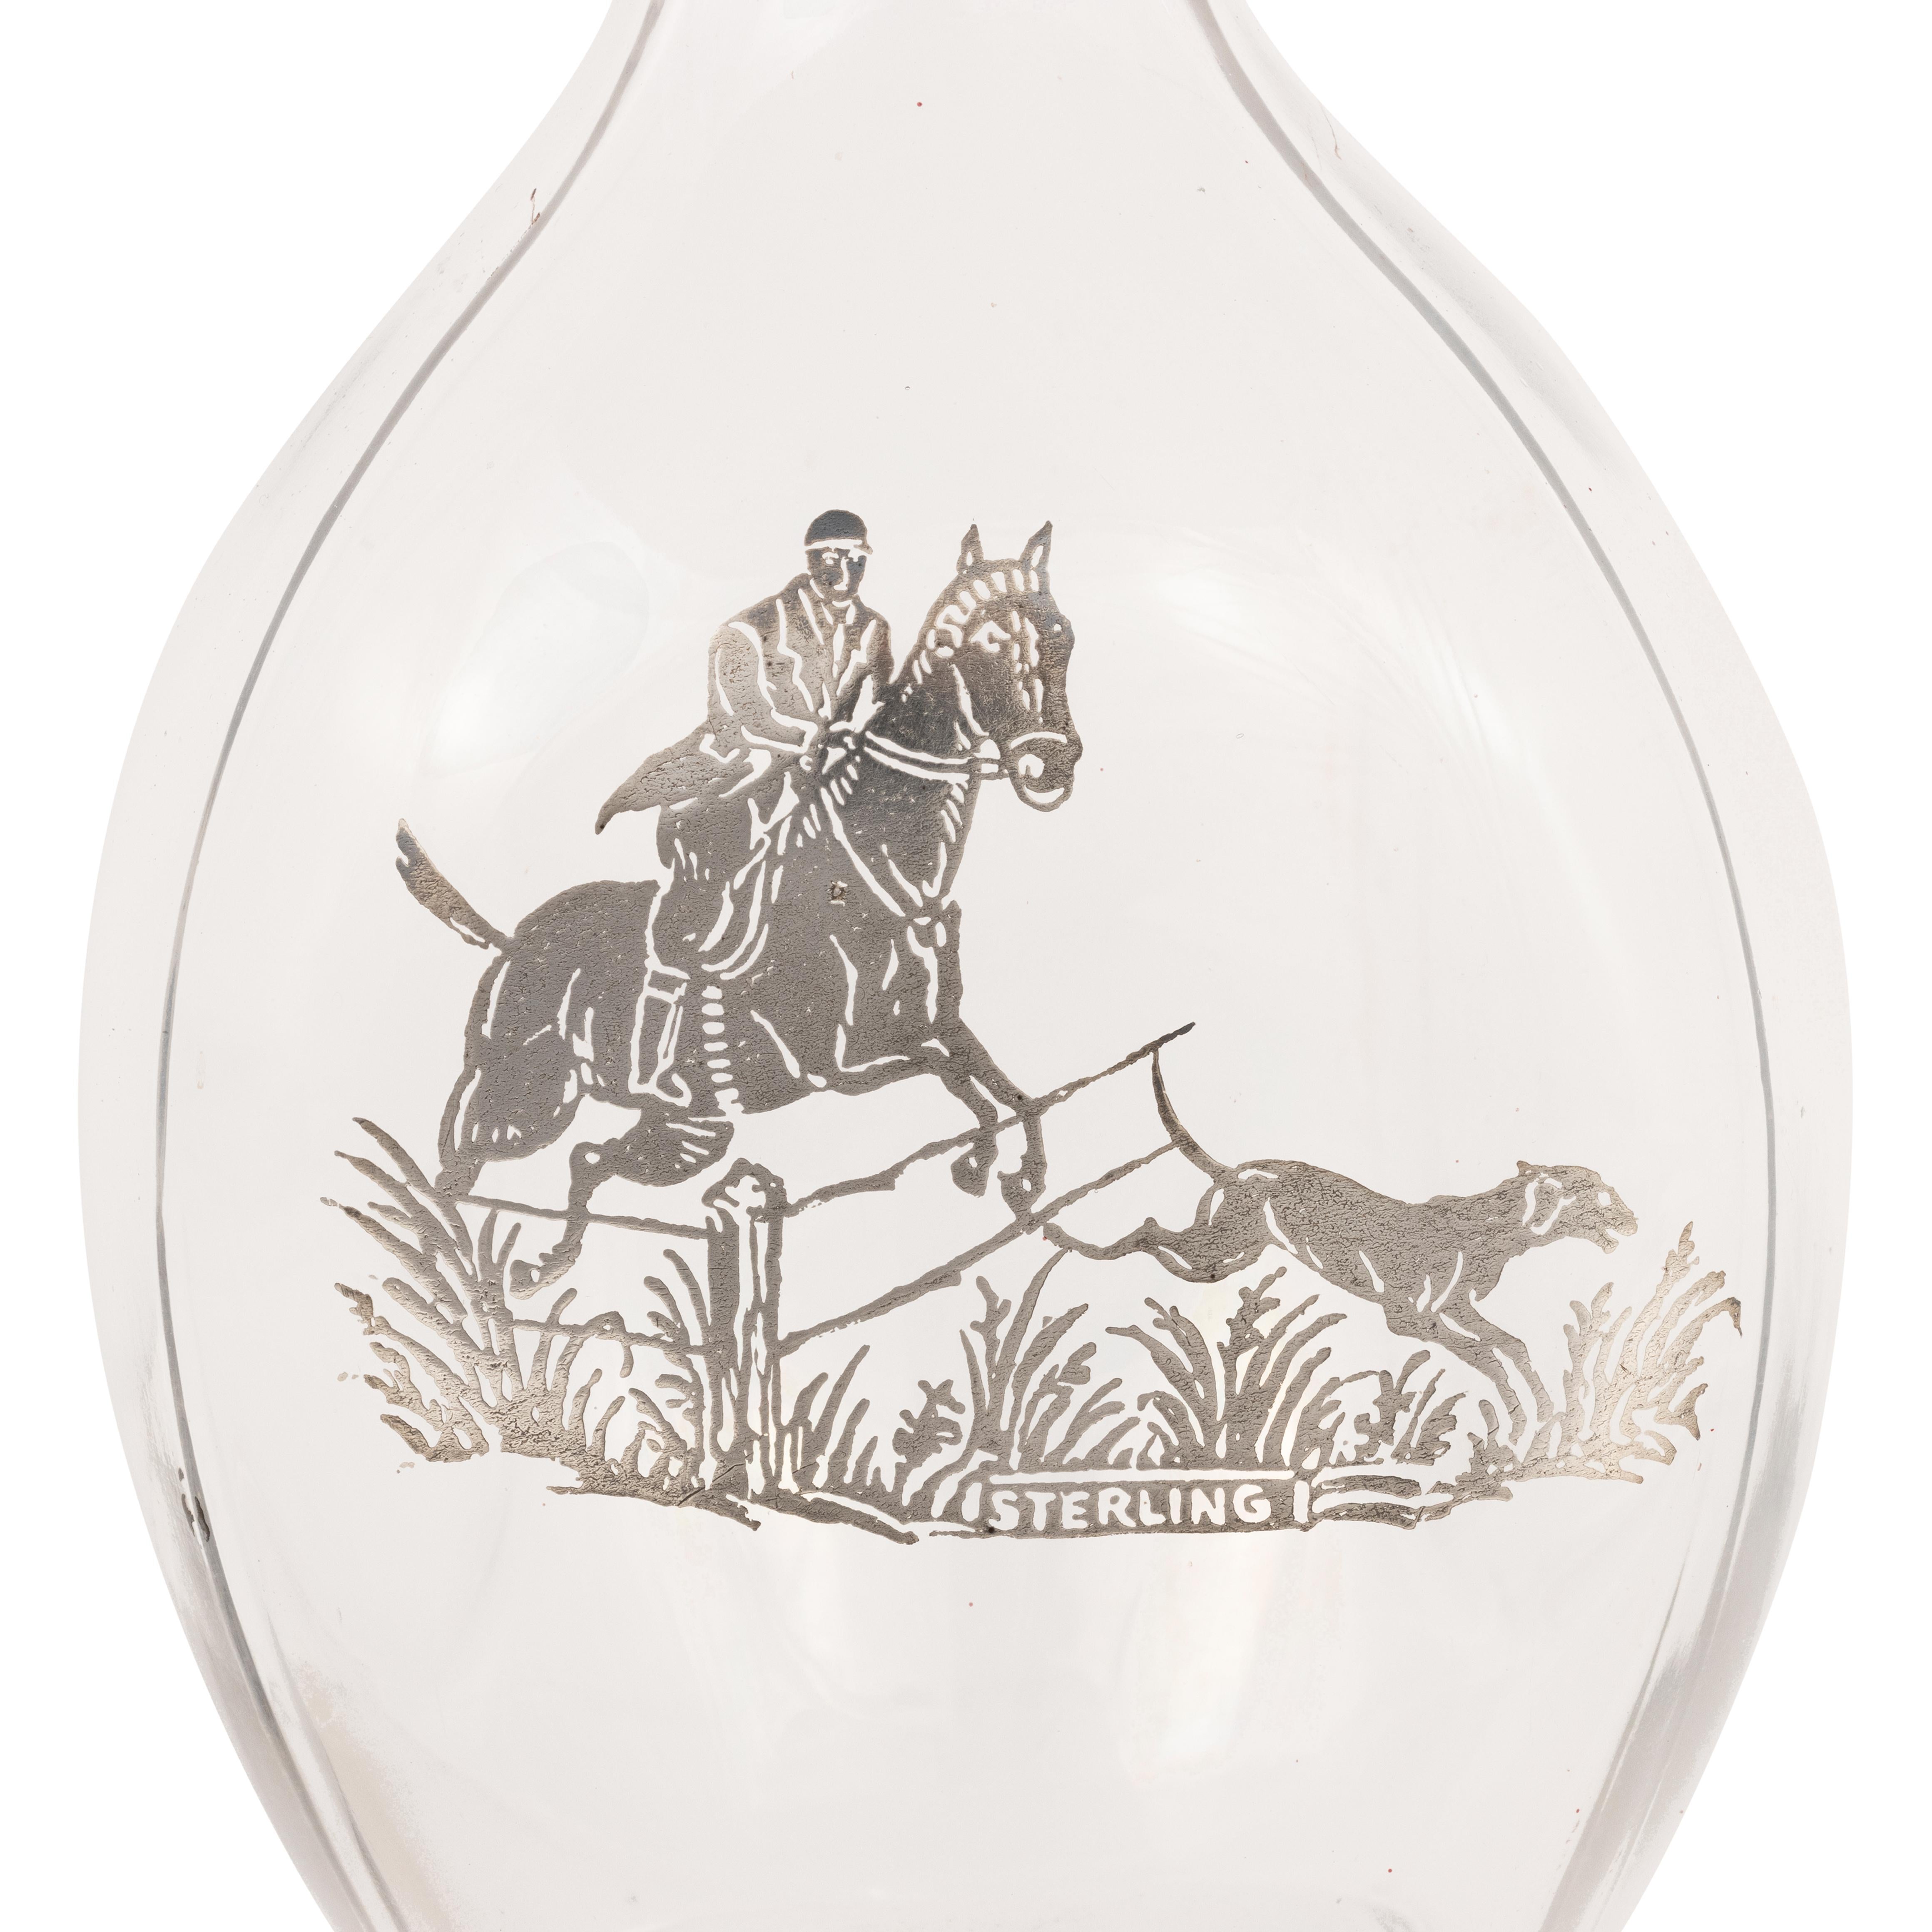 Sporting theme back bar bottle with sterling motif of fox hunter and hound. Original stopper. Pinch bottle three piece glass mold.

PERIOD: 19th Century

ORIGIN: California

SIZE: 5